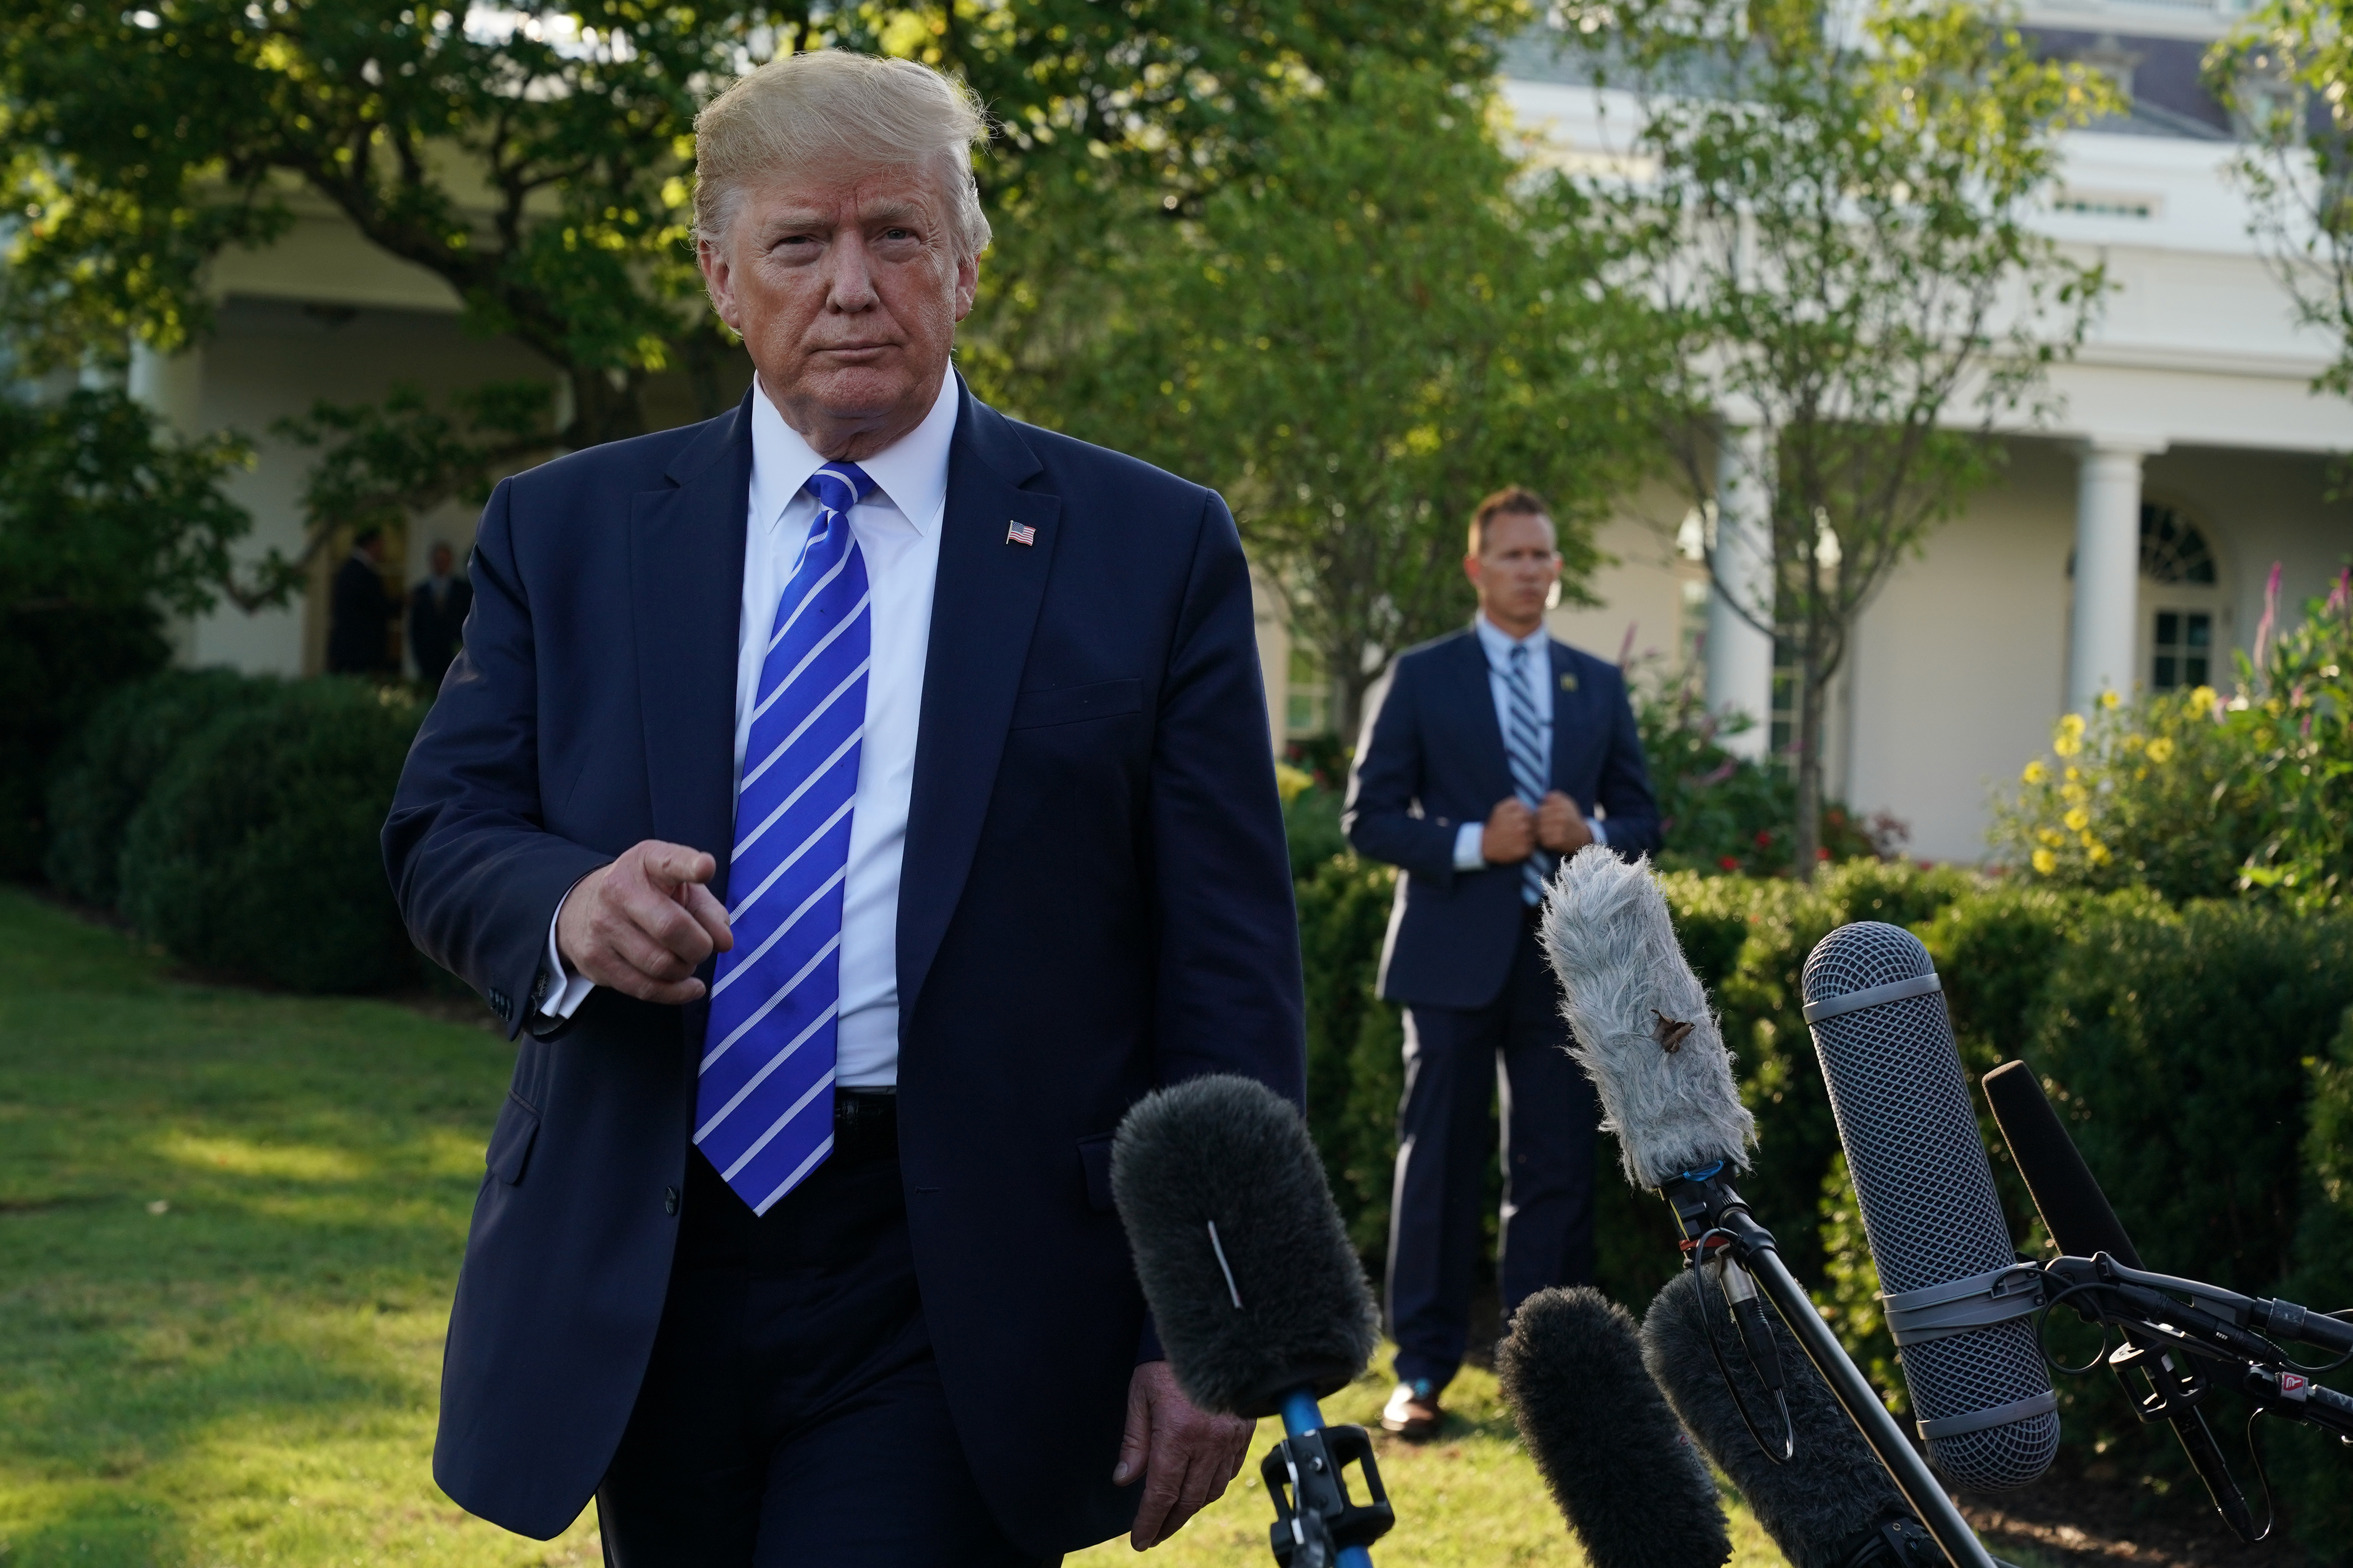 President Donald Trump addressed members of the media on Friday before he left for Camp David.